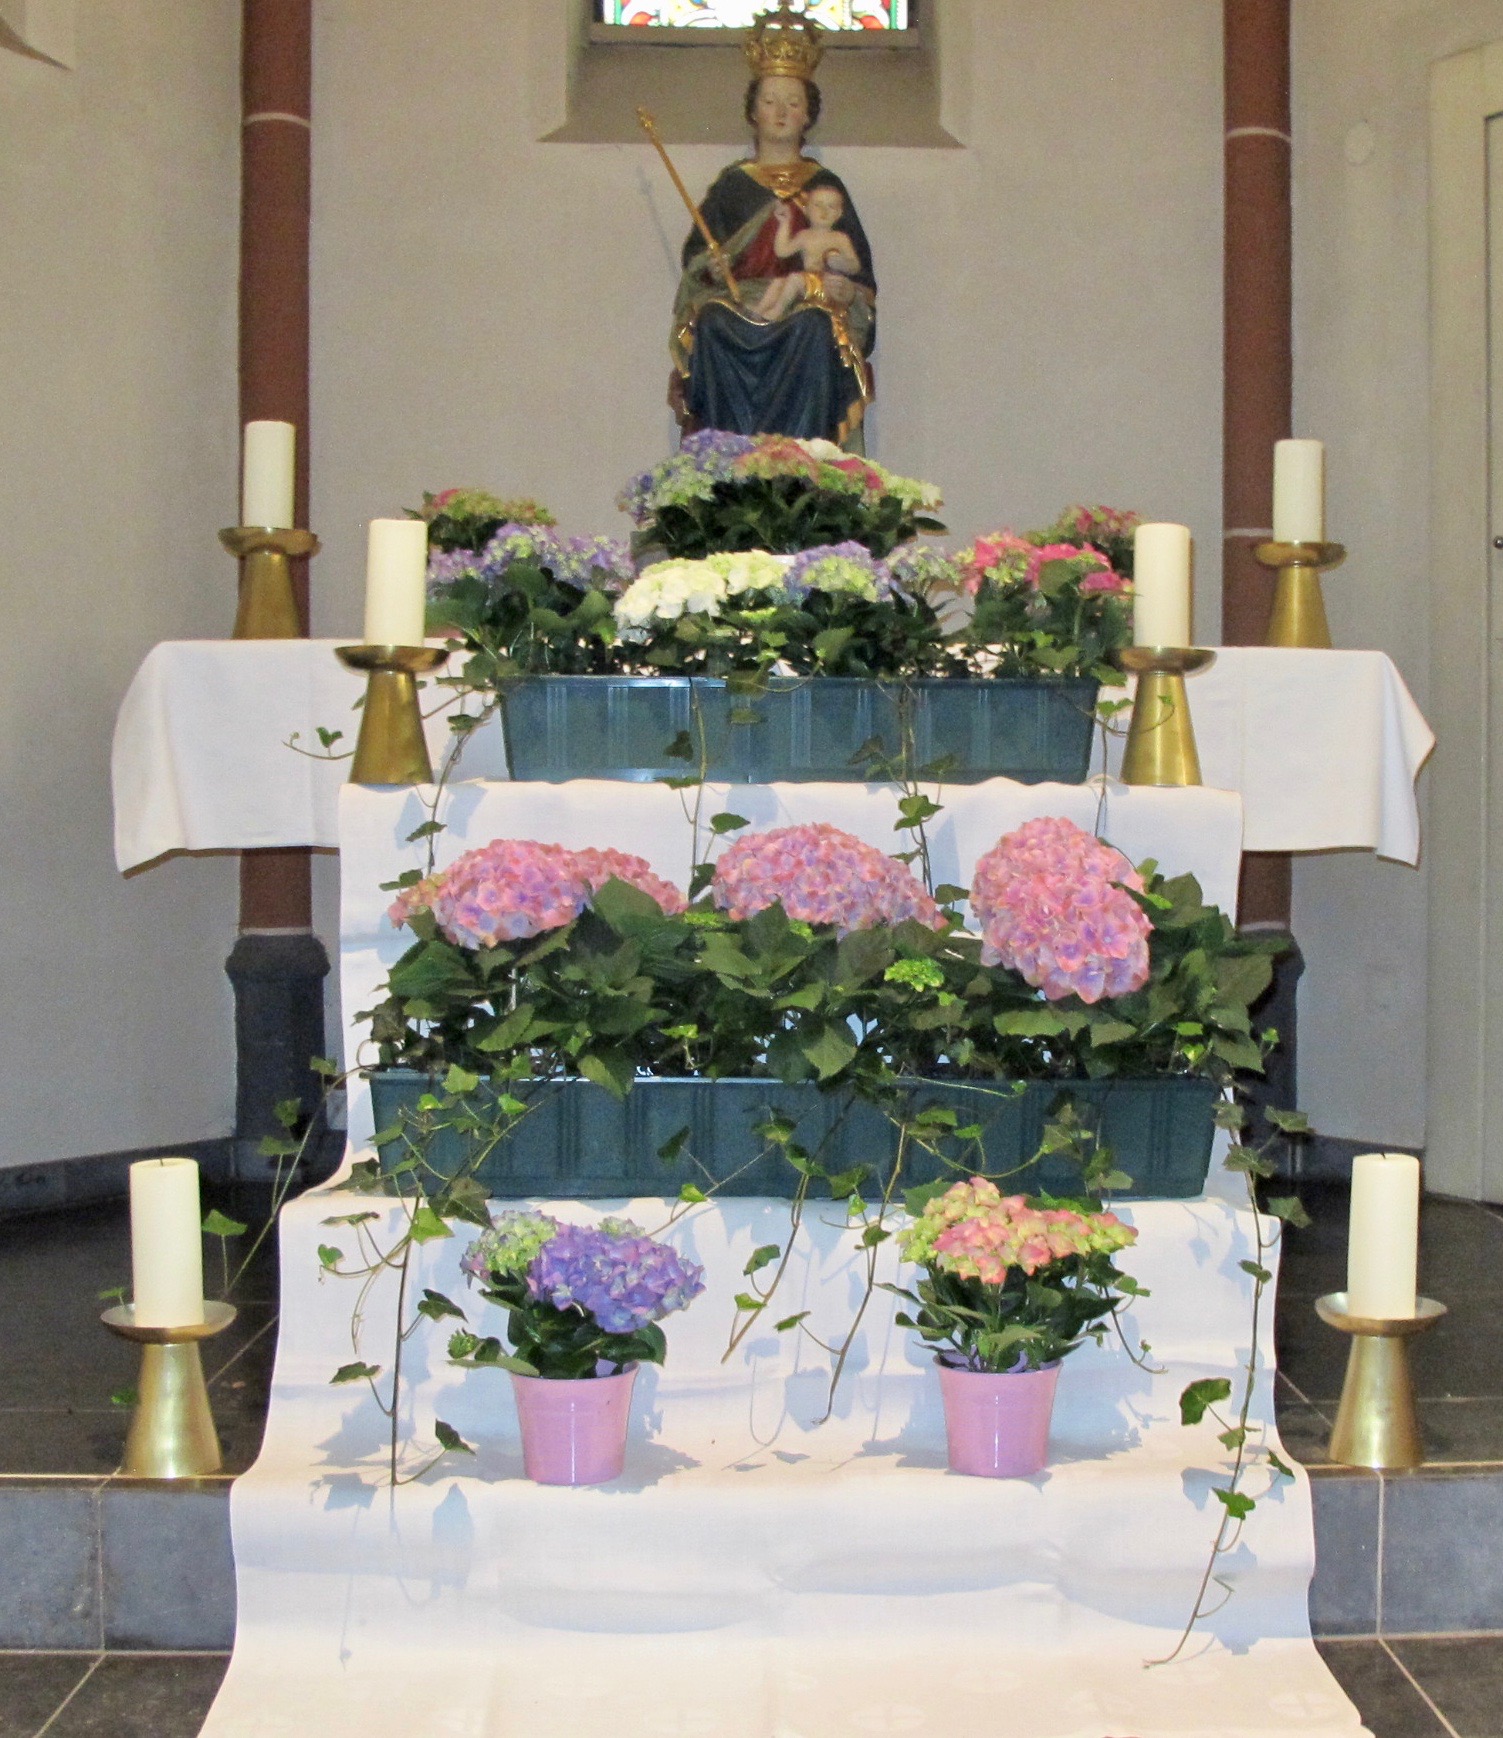 Maialtar in St. Clemens (c) St. Clemens